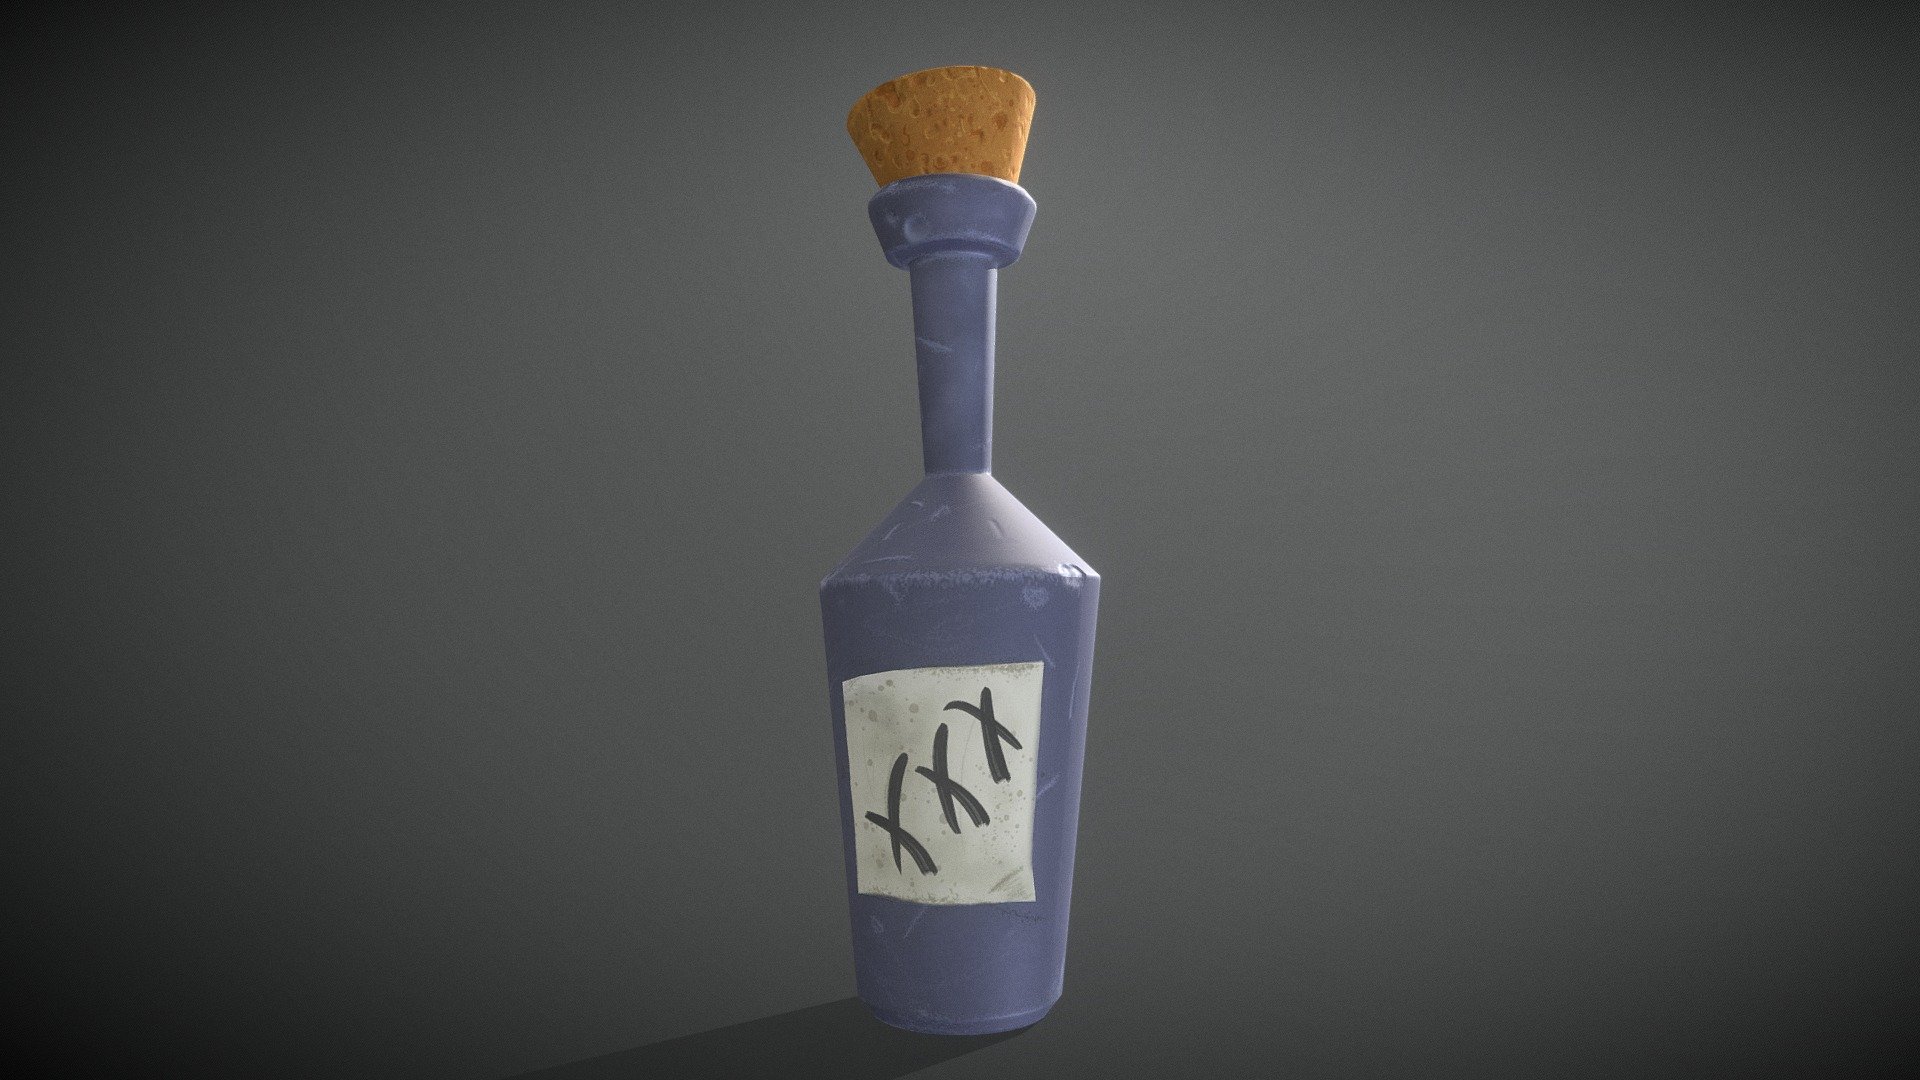 Just a quick warm up project to get back into modeling, sculpting, and hand painting textures. A stylized bottle seemed like a good place to start because of the different materials that needed to be painted 3d model